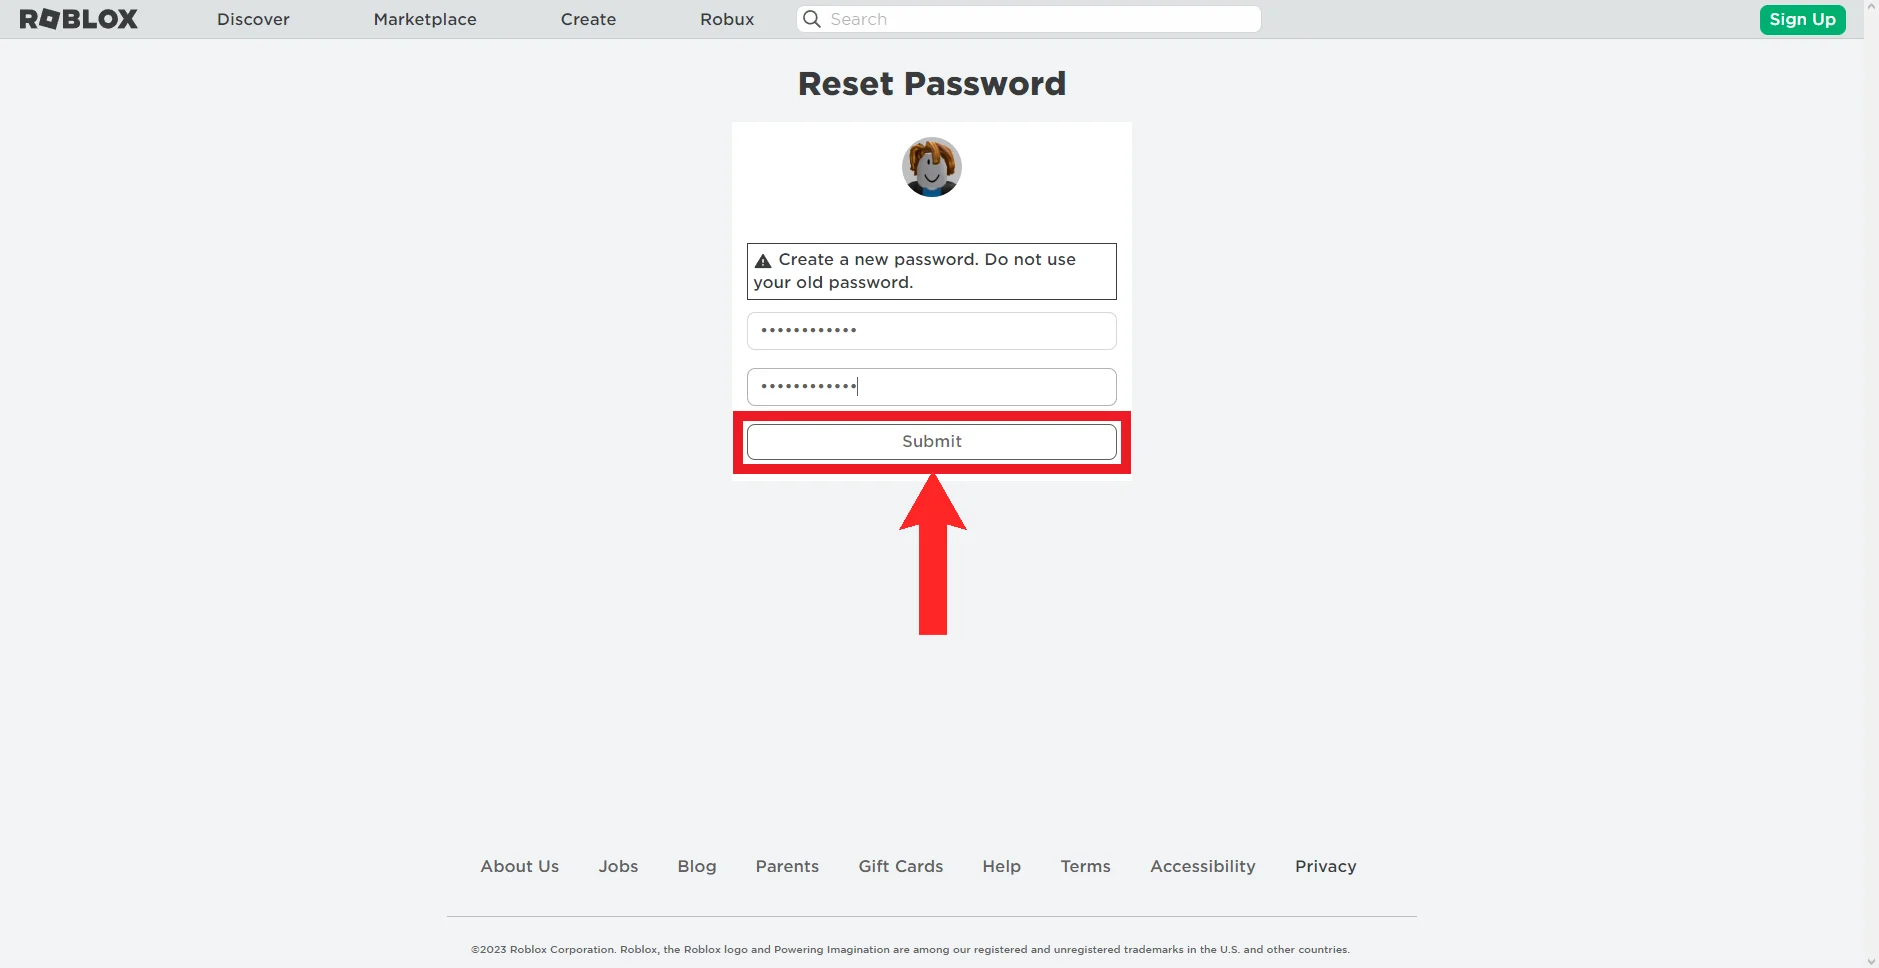 How to change your Roblox password or reset your Roblox password